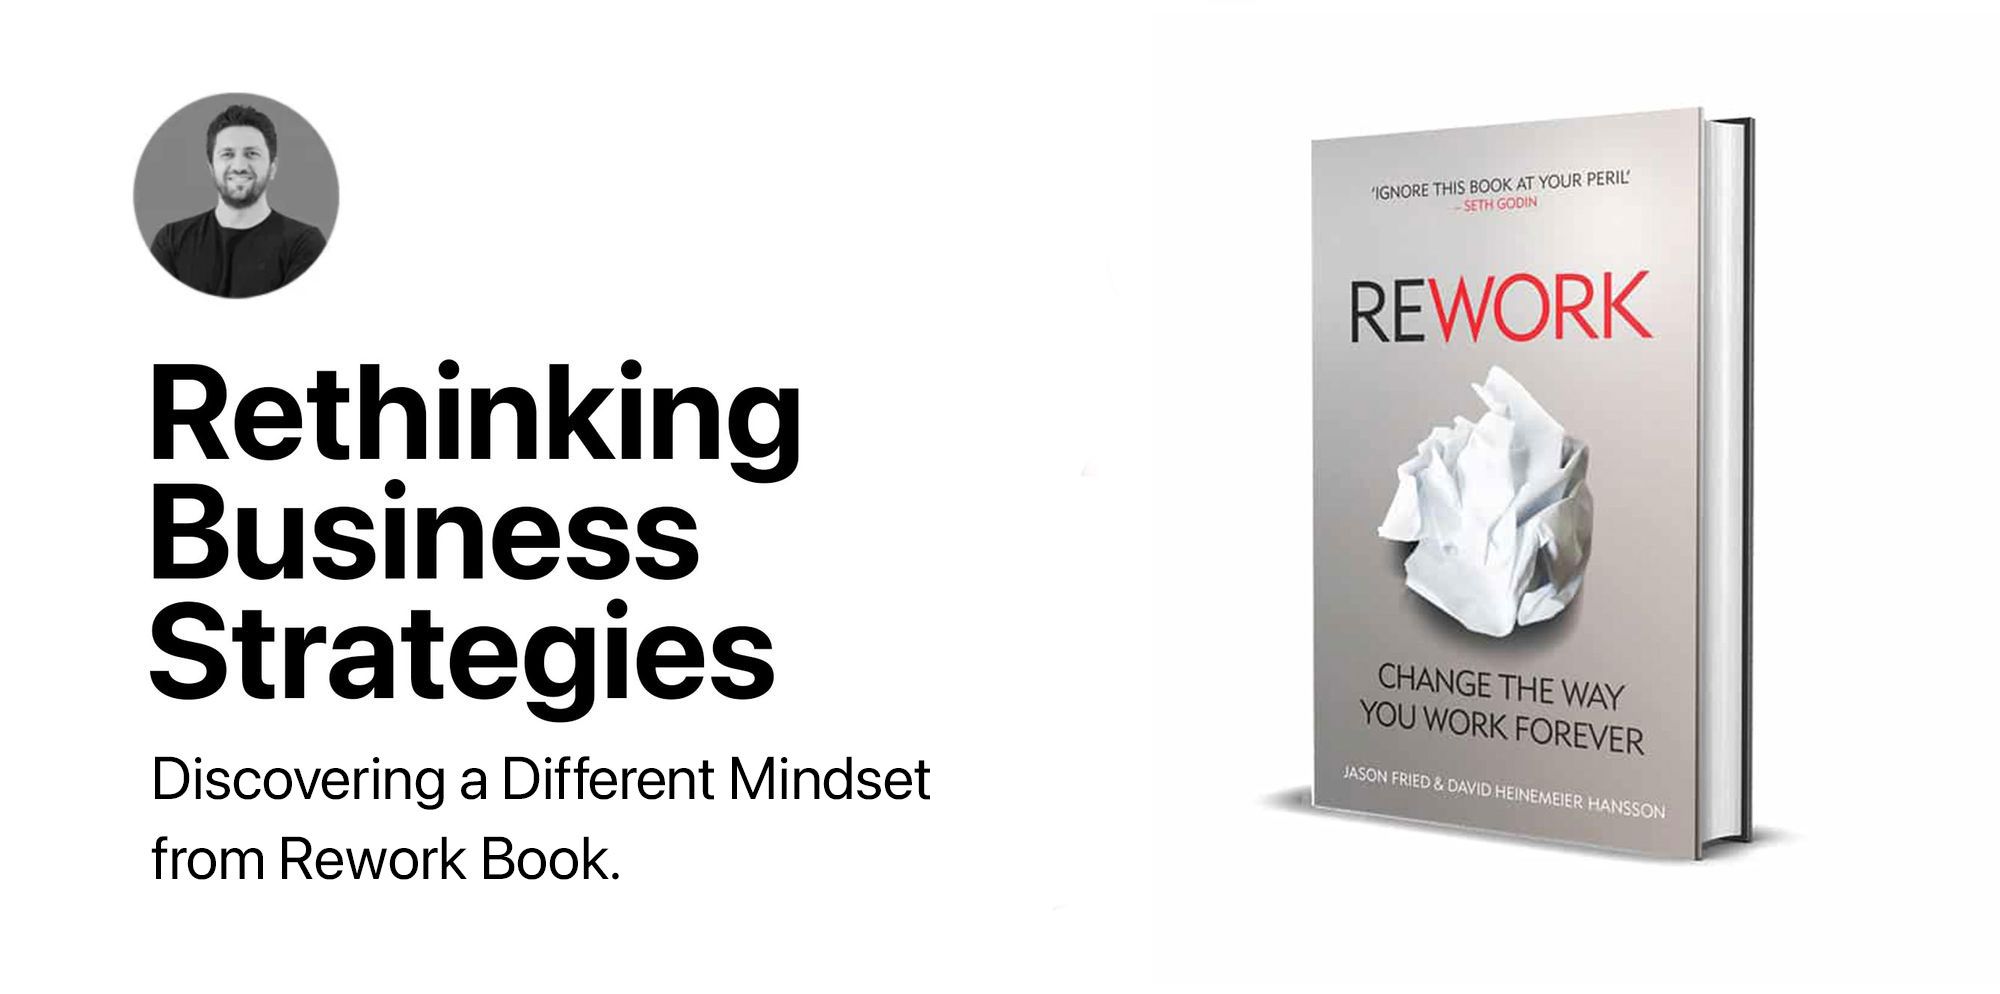 Rethinking Business Strategies: Discovering a Different Mindset with the Book "Rework"